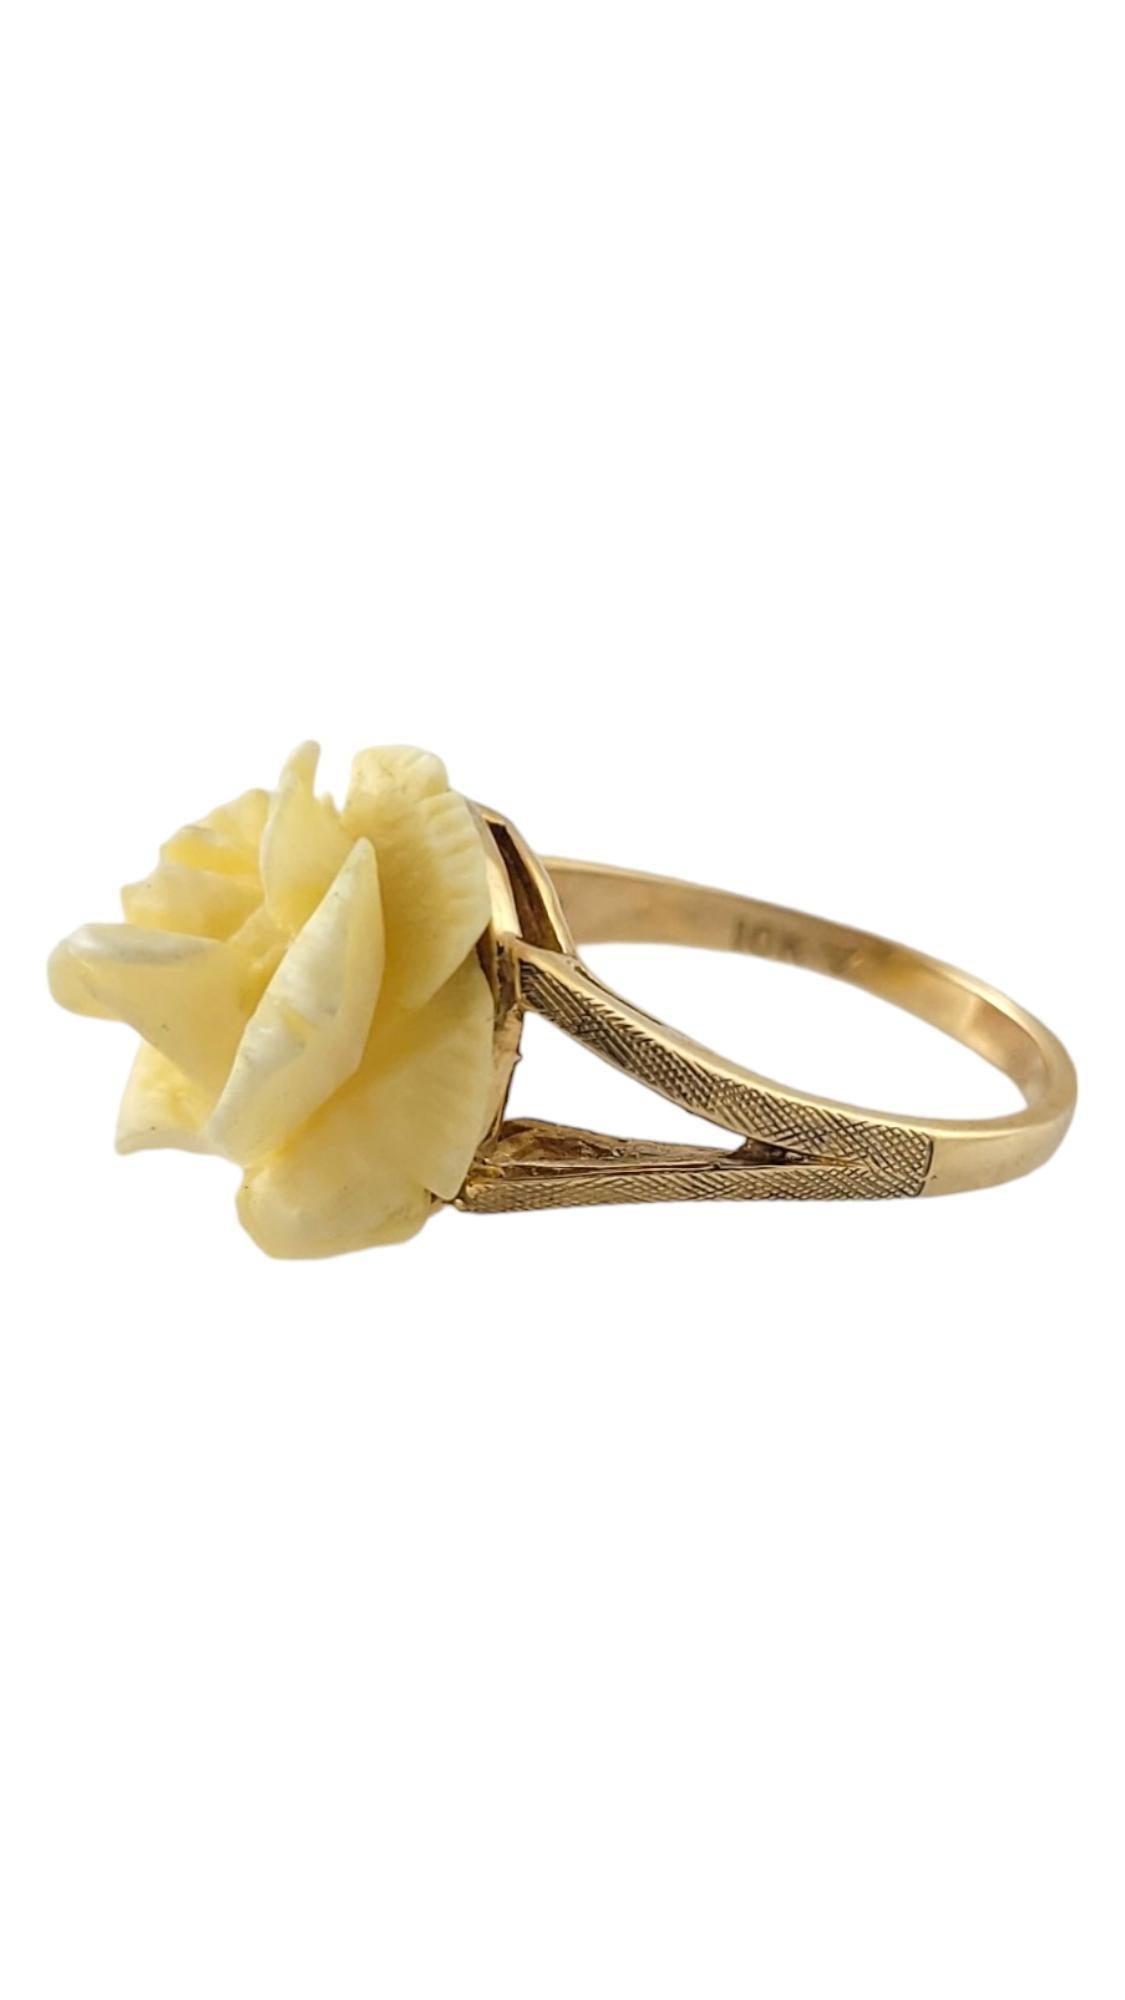 Vintage 10K Yellow Gold White Rose Ring Size 5.25 #16933 In Good Condition For Sale In Washington Depot, CT